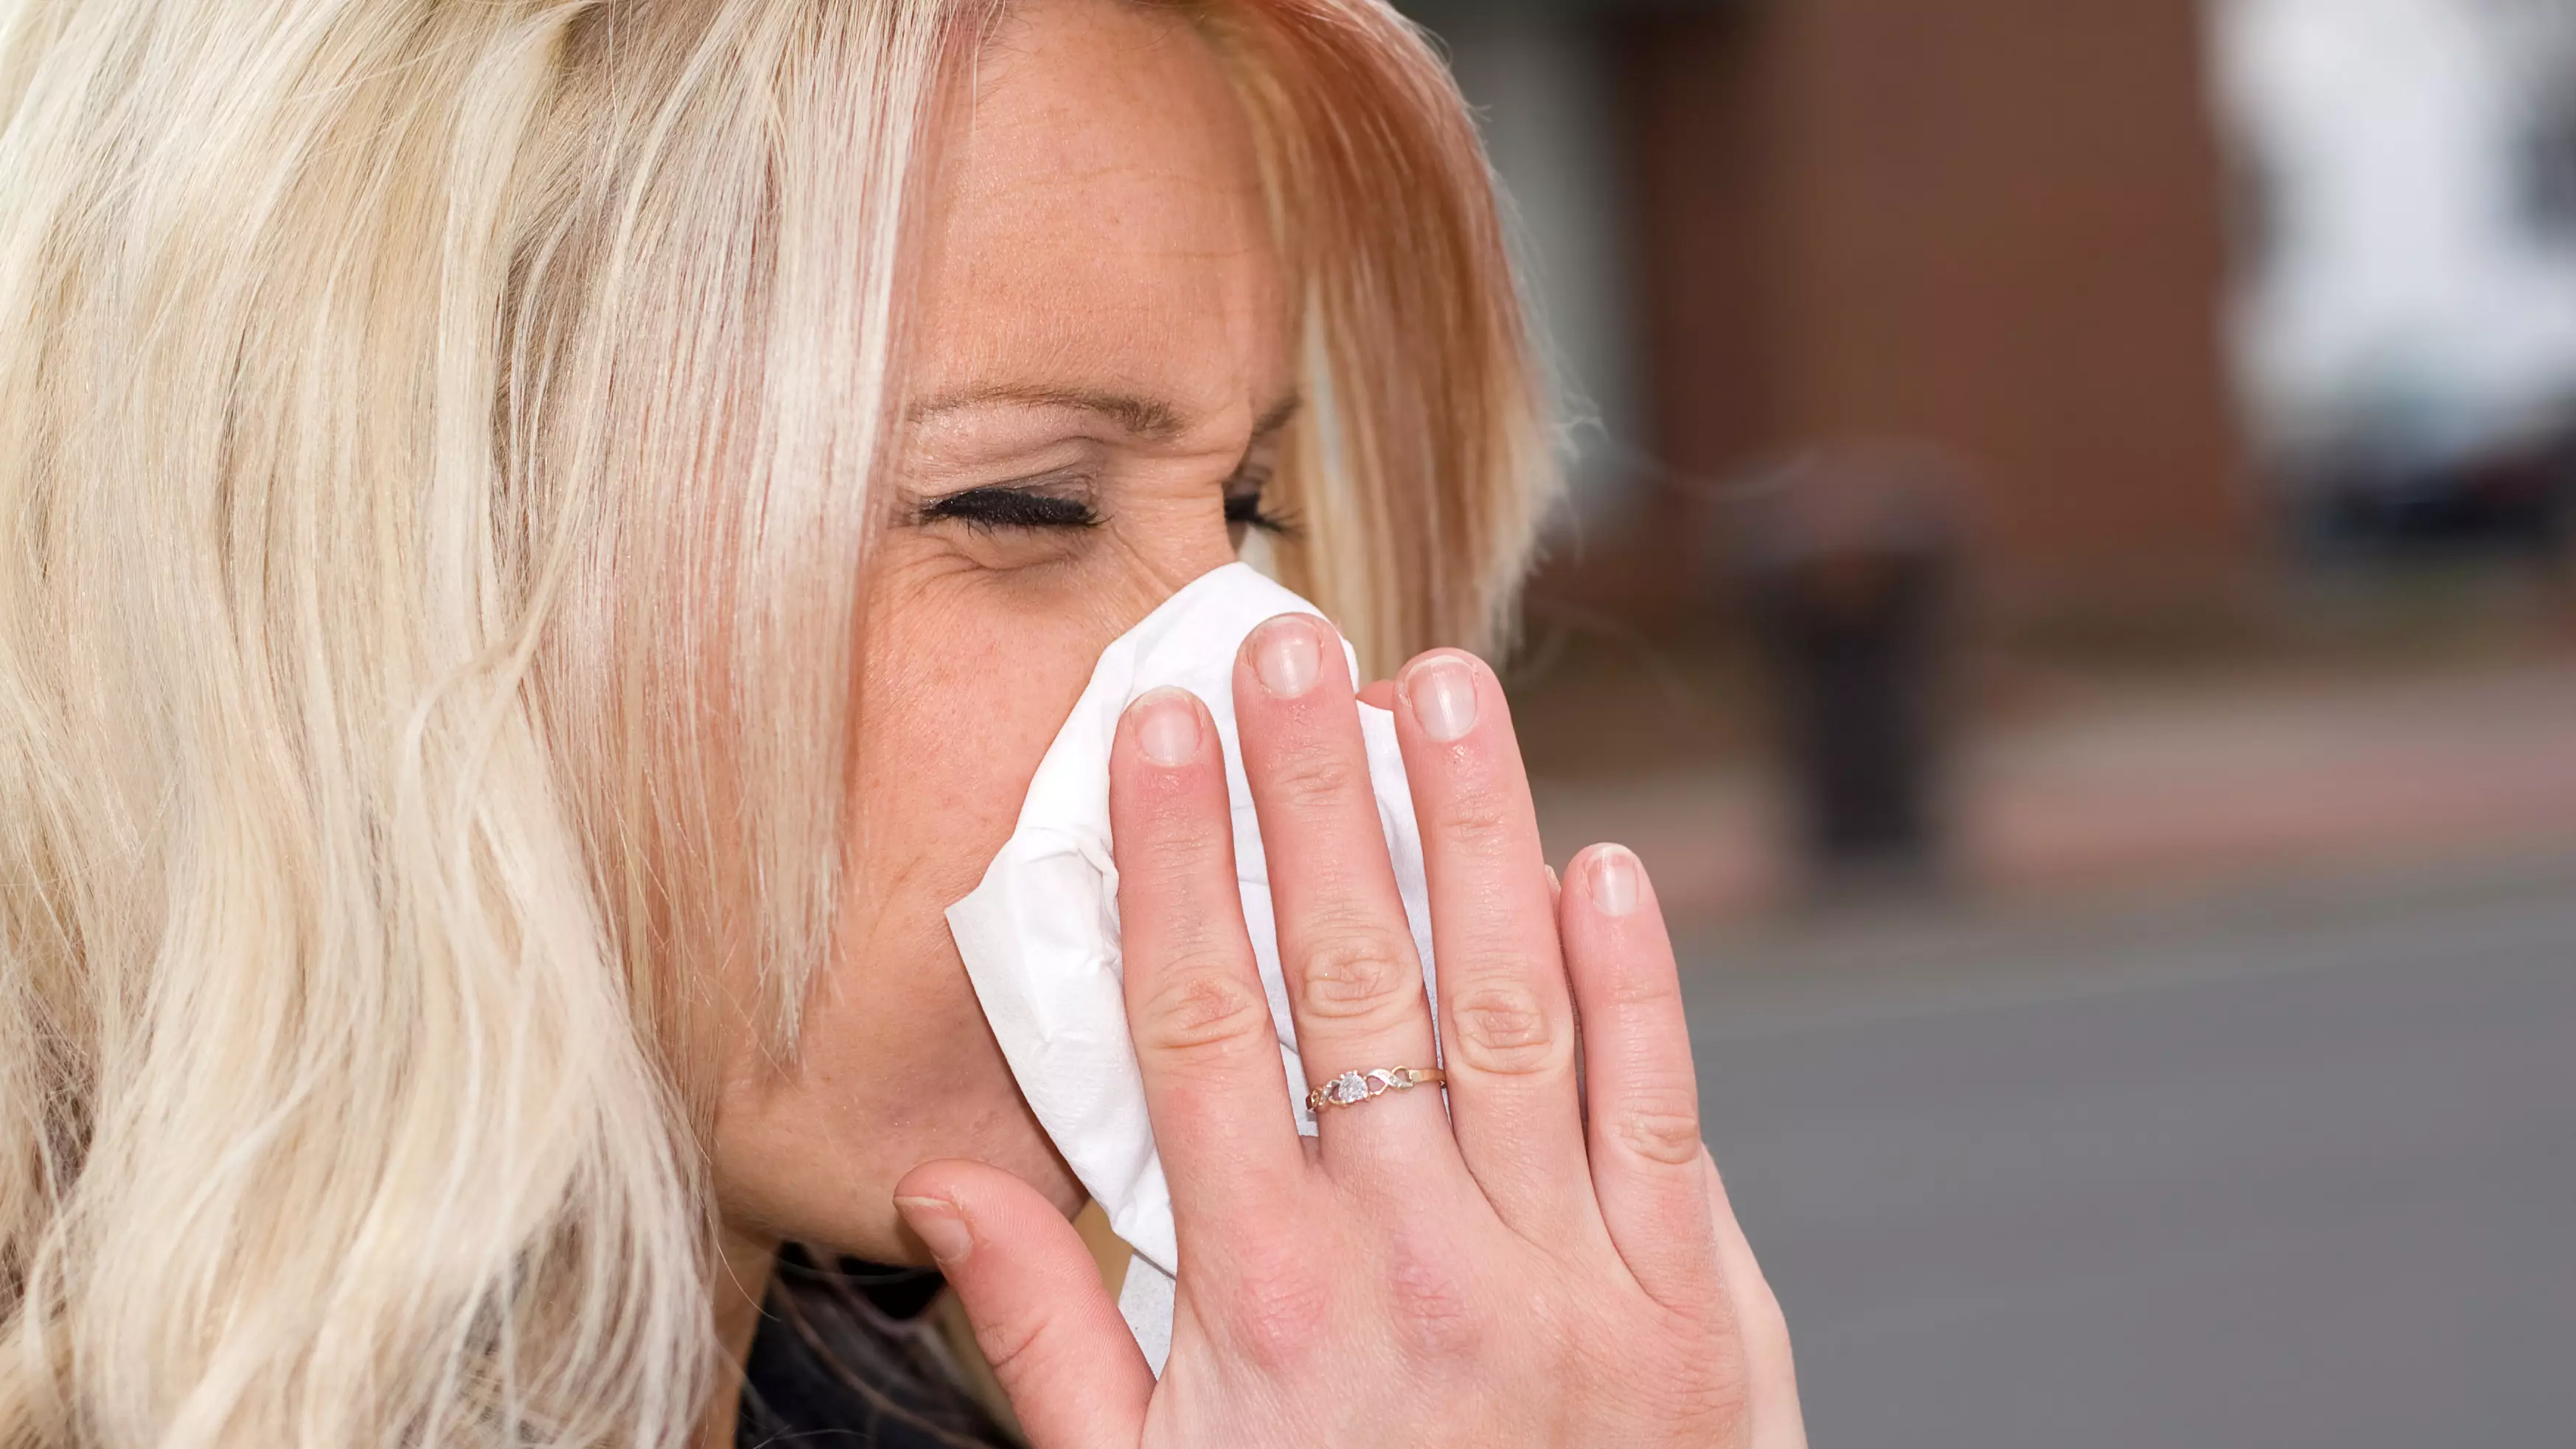 Don't Hold Nose And Close Mouth When Sneezing, Doctors Warn